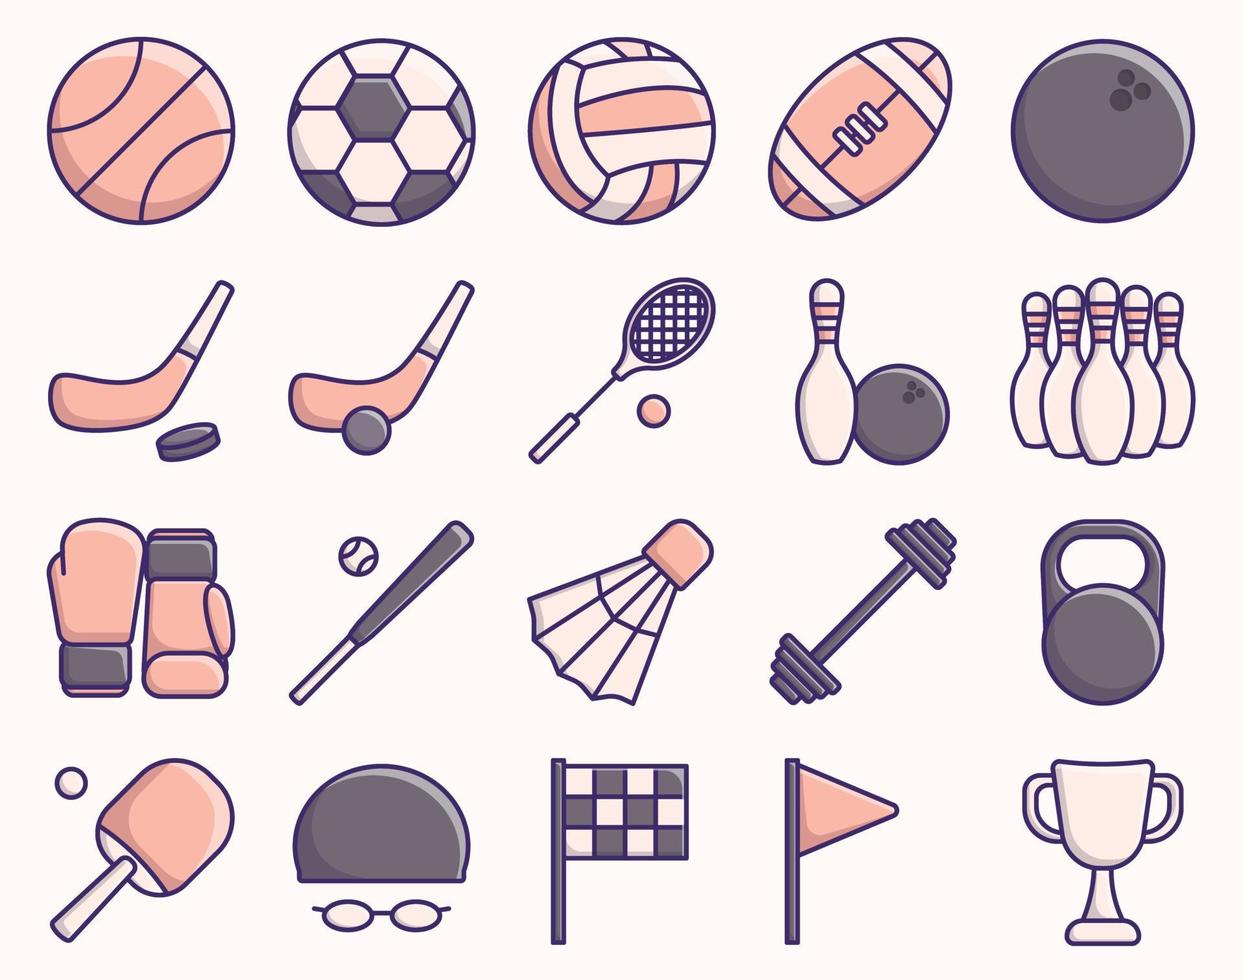 Vector illustration set of twenty icons of sports accessories of different types. Flat style sports equipment.